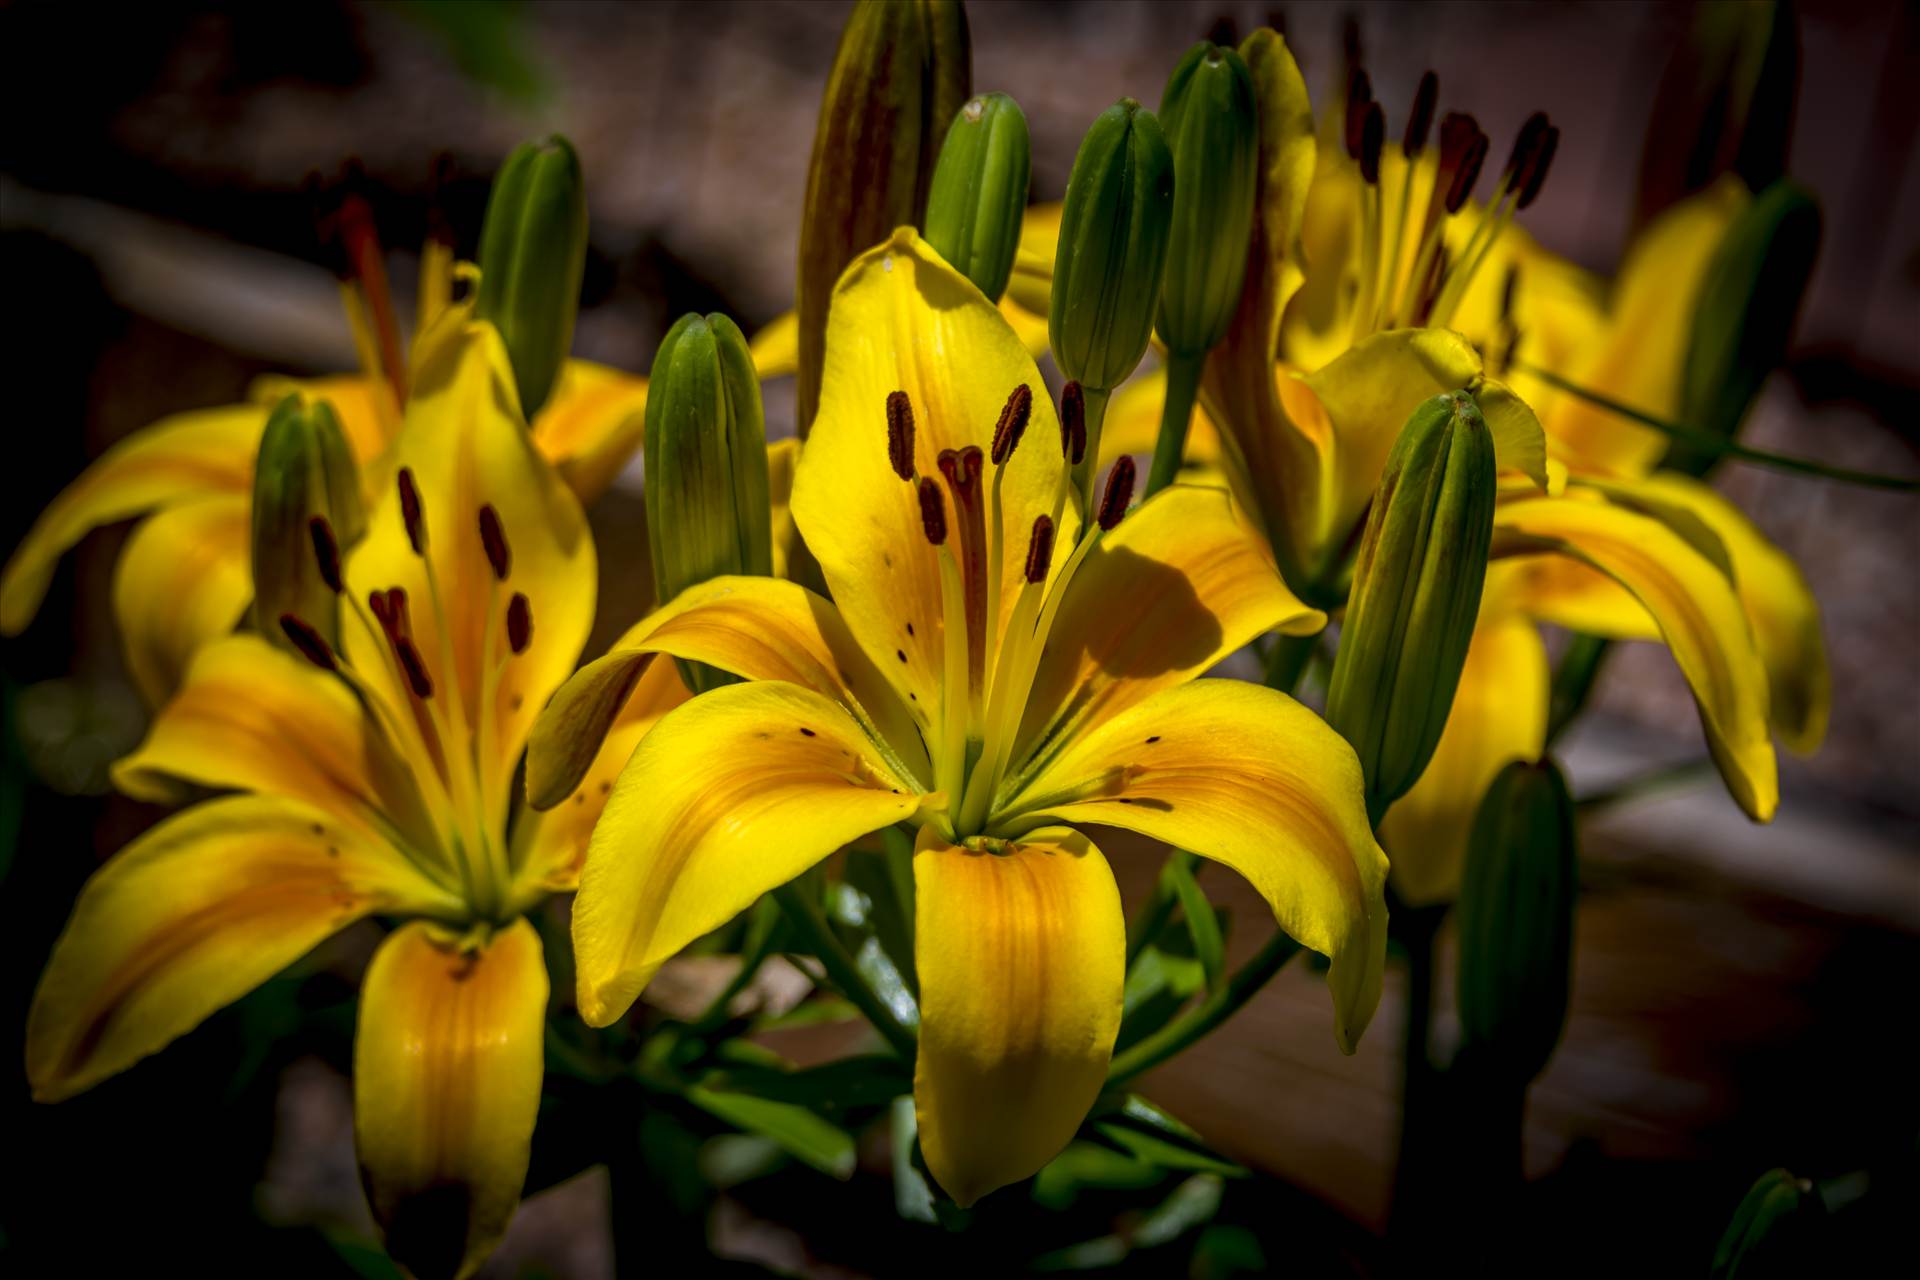 Lilies from the Garden.jpg Lilies from the Garden by Dennis Rose